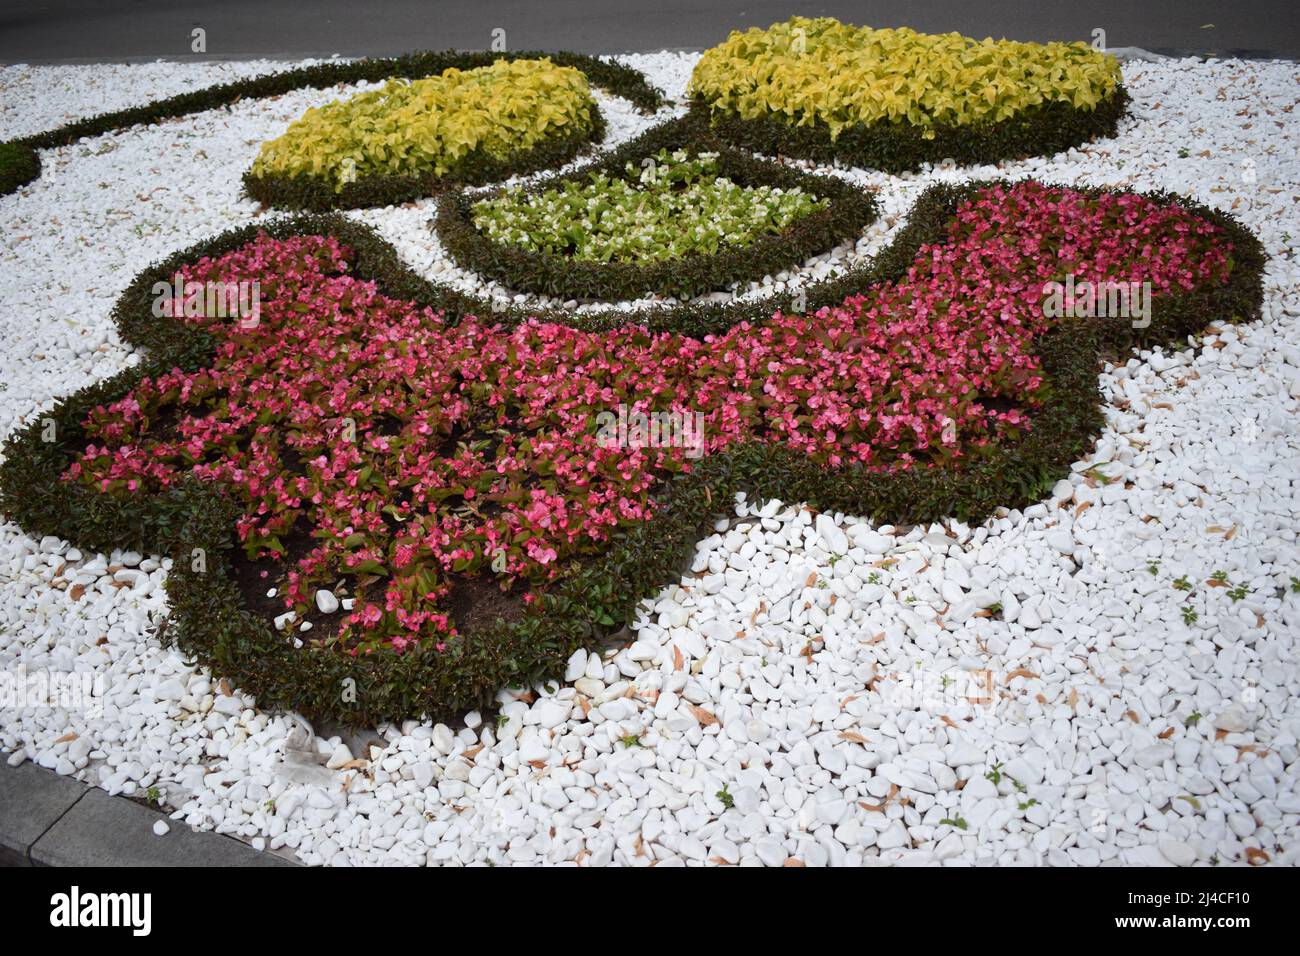 Red and pink begonia and marigold with artificial decorative white stone, landscape design. Gardens In Bloom, Landscape Design elements. Flower garden Stock Photo